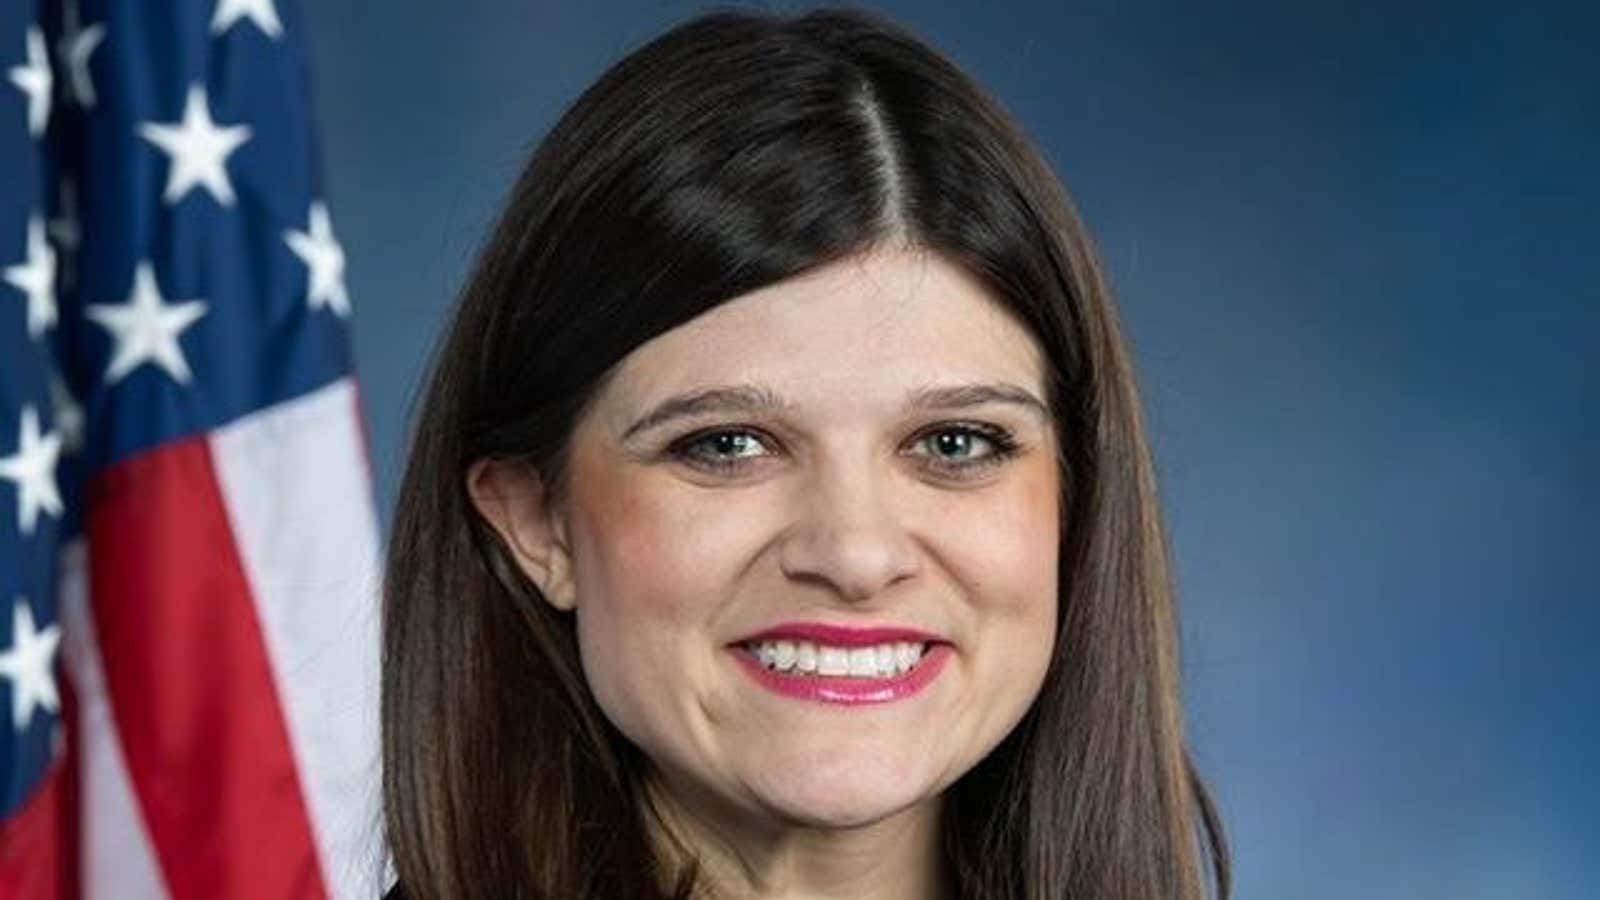 Rep. Haley Stevens’ candidacy wasn’t planned. Instead, it rose out of a need for better representation